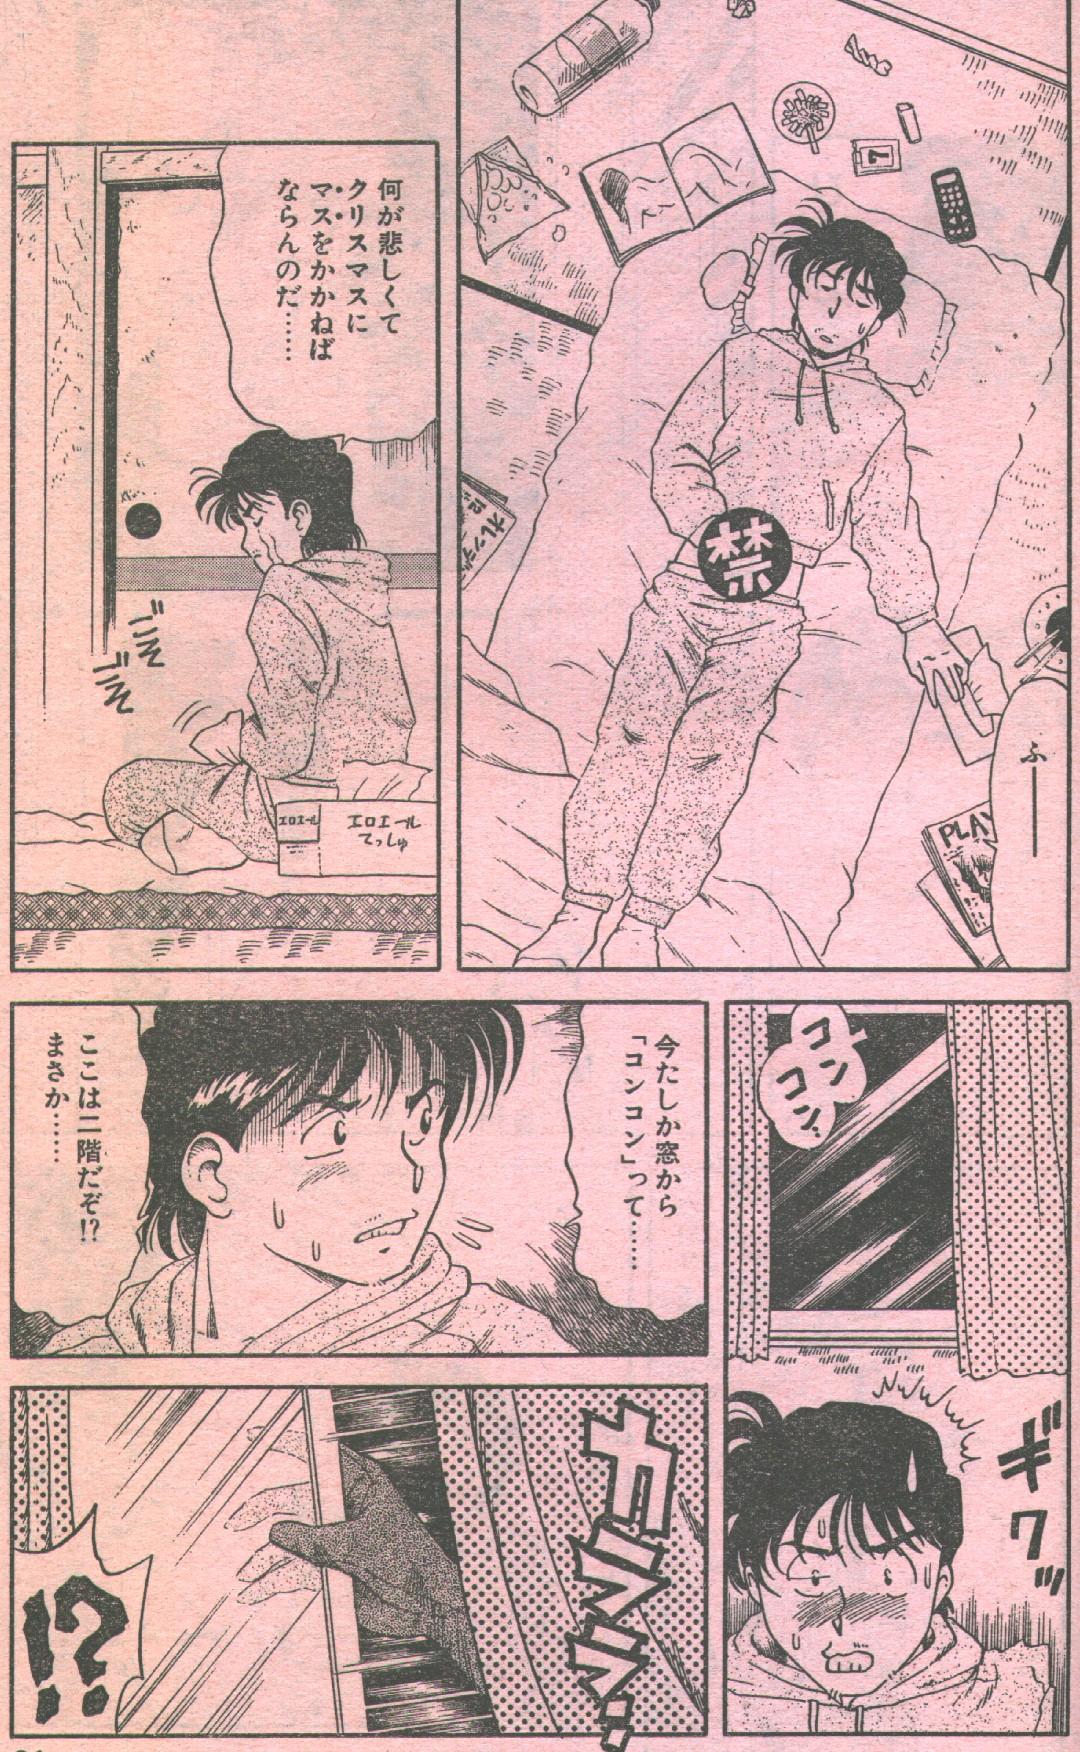 Cotton Comic 1994-01 [Incomplete] page 46 full